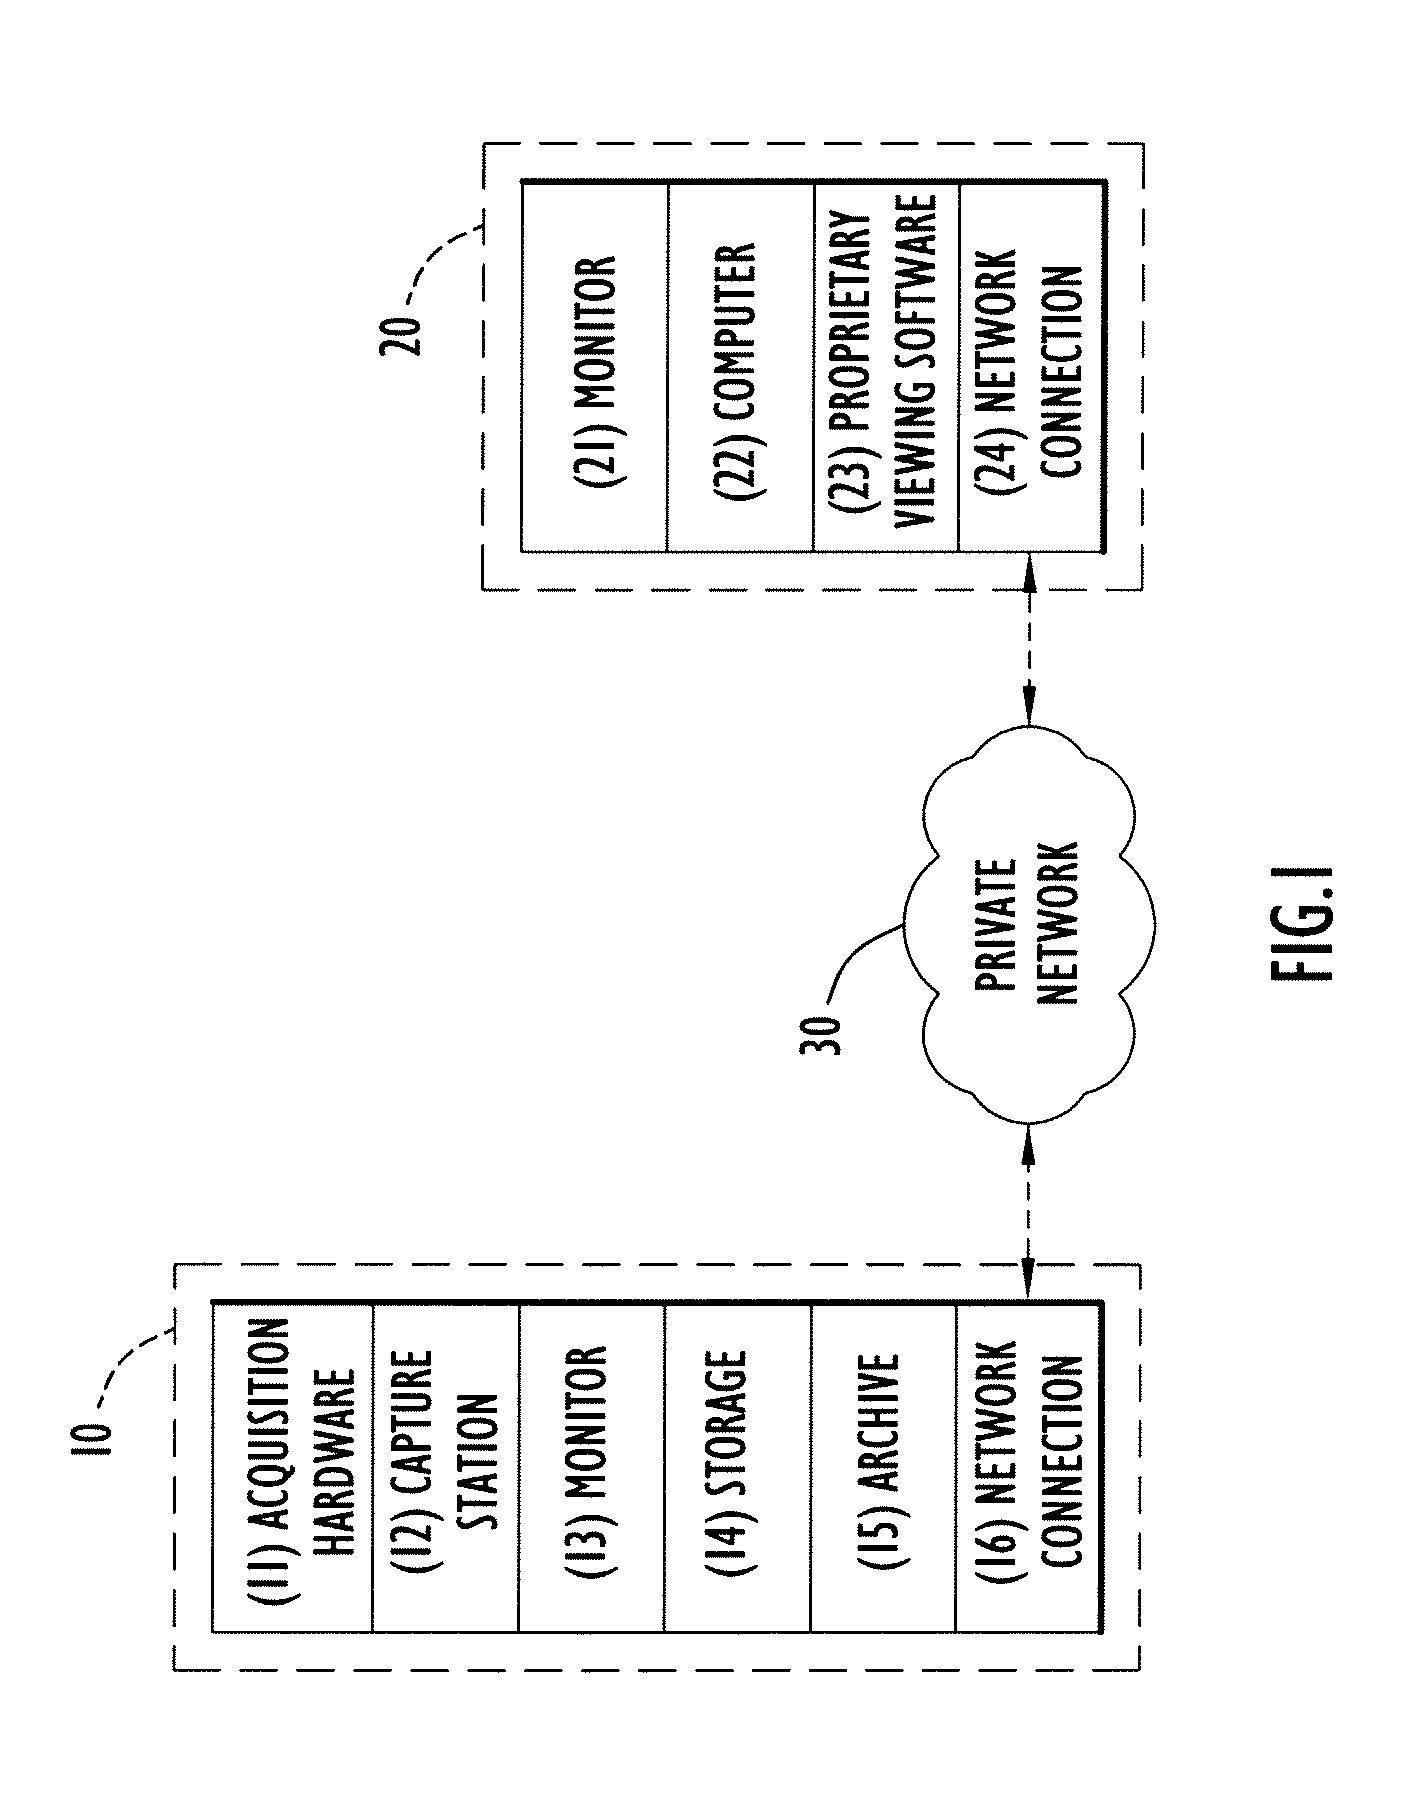 System and method for efficient diagnostic analysis of ophthalmic examinations